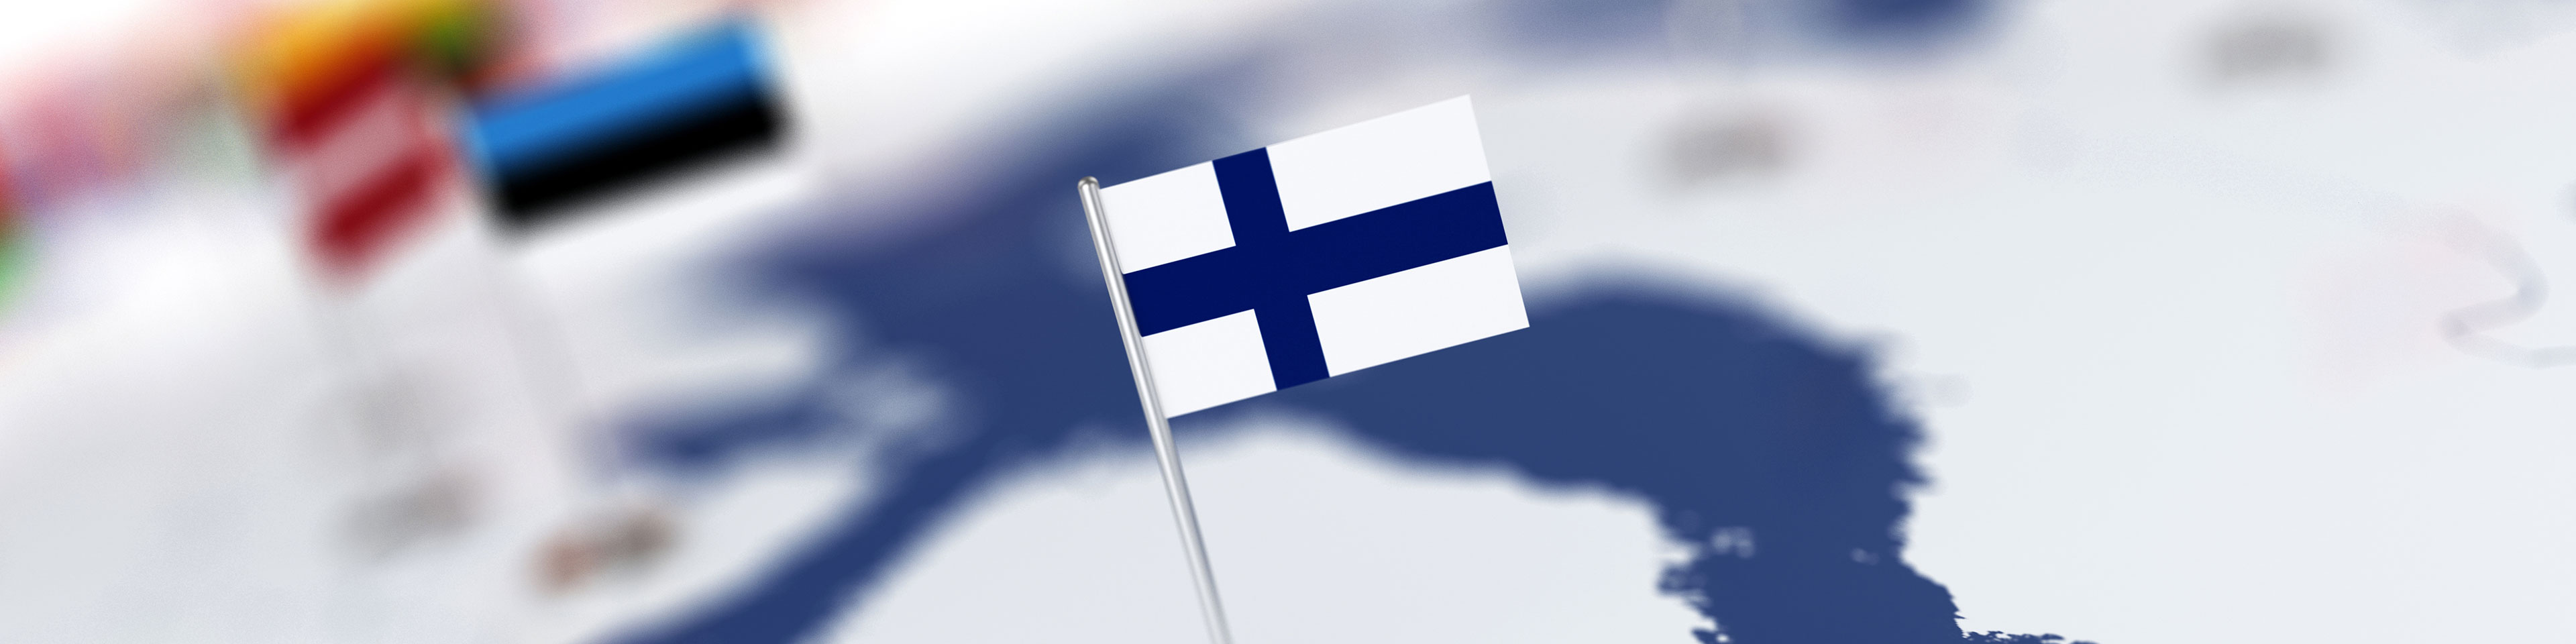 Complying with the Finnish act on money laundering: beneficial ownership registrations